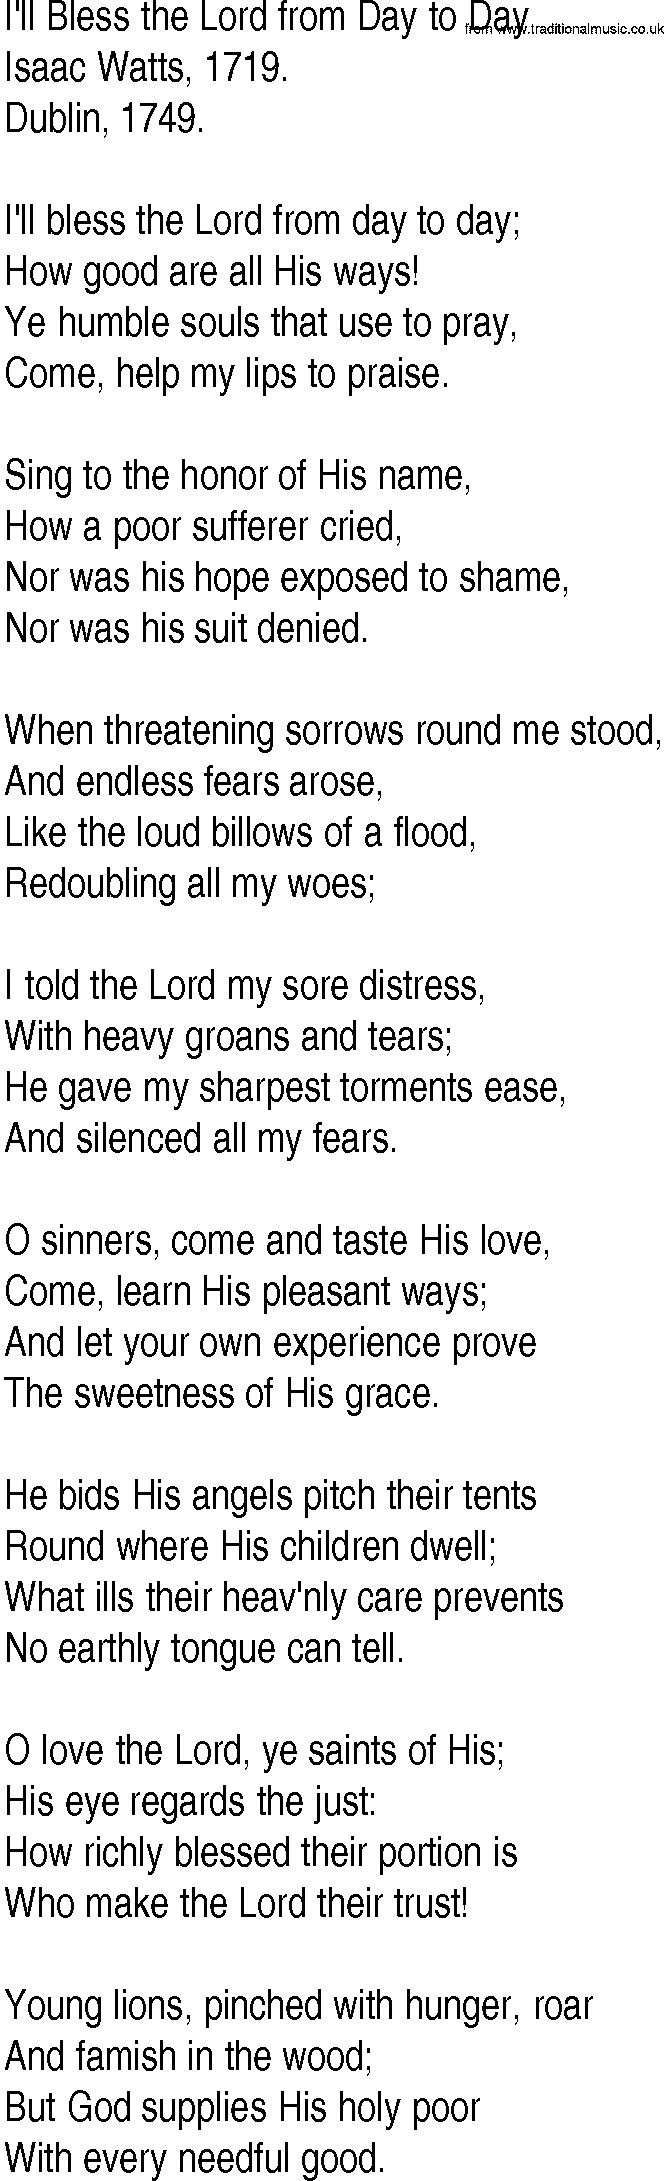 Hymn and Gospel Song: I'll Bless the Lord from Day to Day by Isaac Watts lyrics